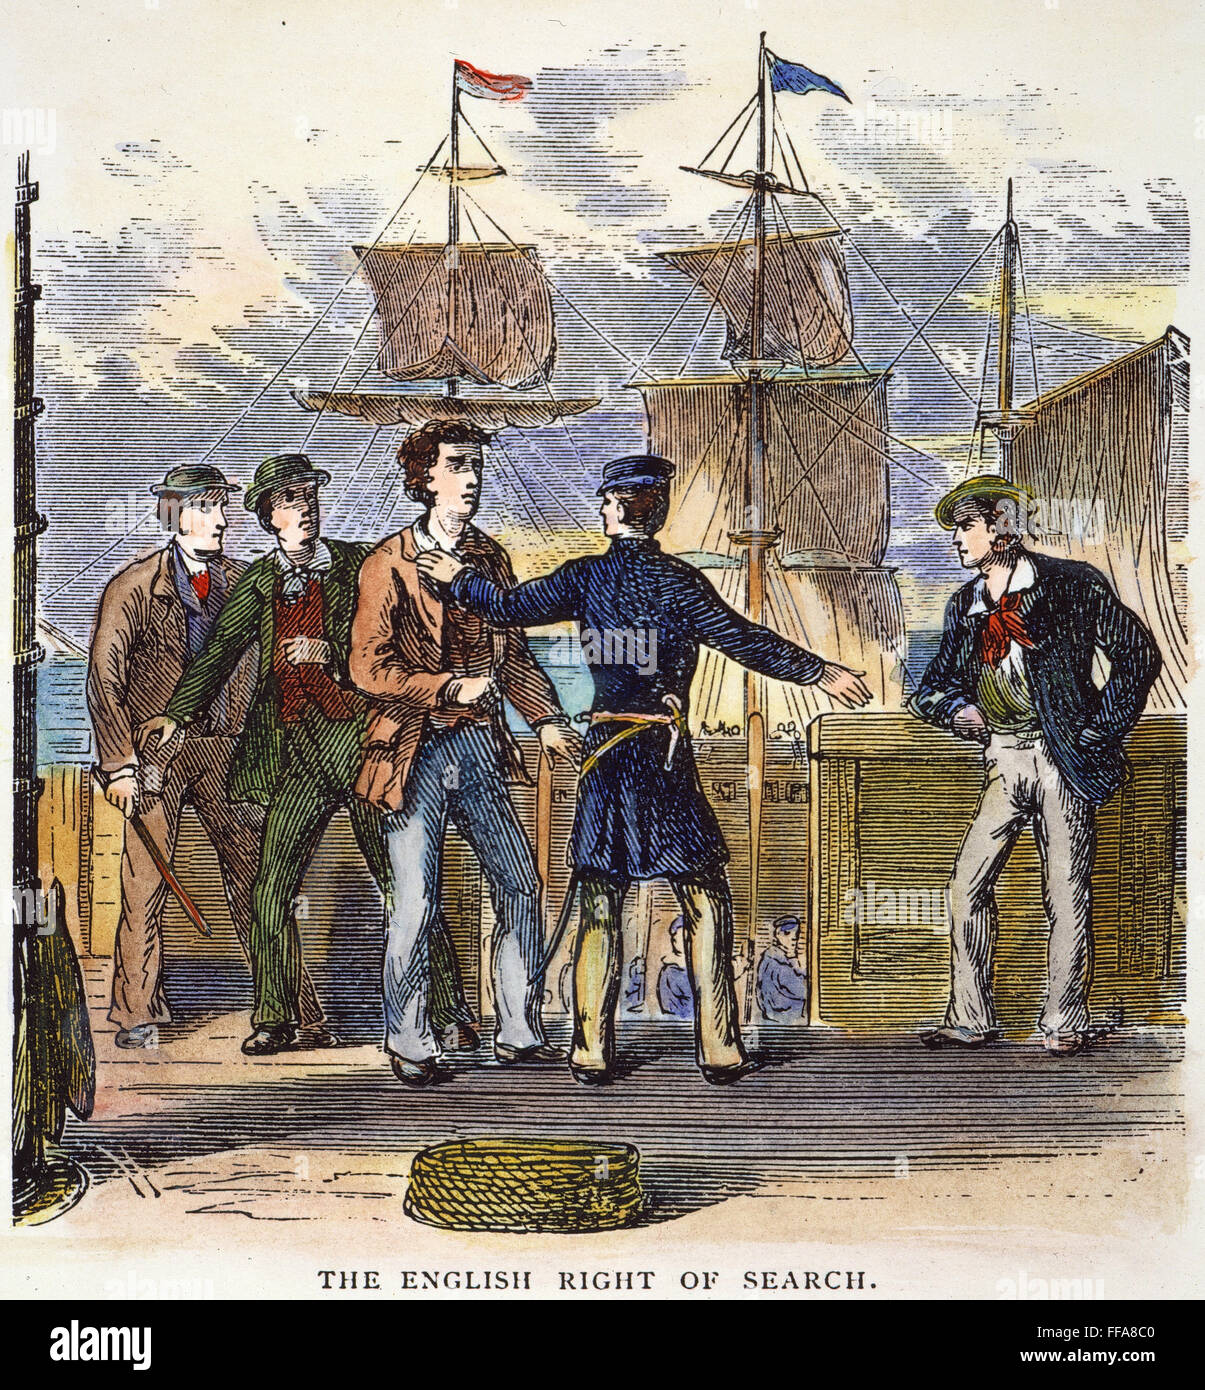 BRITISH: IMPRESSMENT, 1800s. /nThe British impressment of American seamen prior to the War of 1812: colored engraving, 19th century. Stock Photo